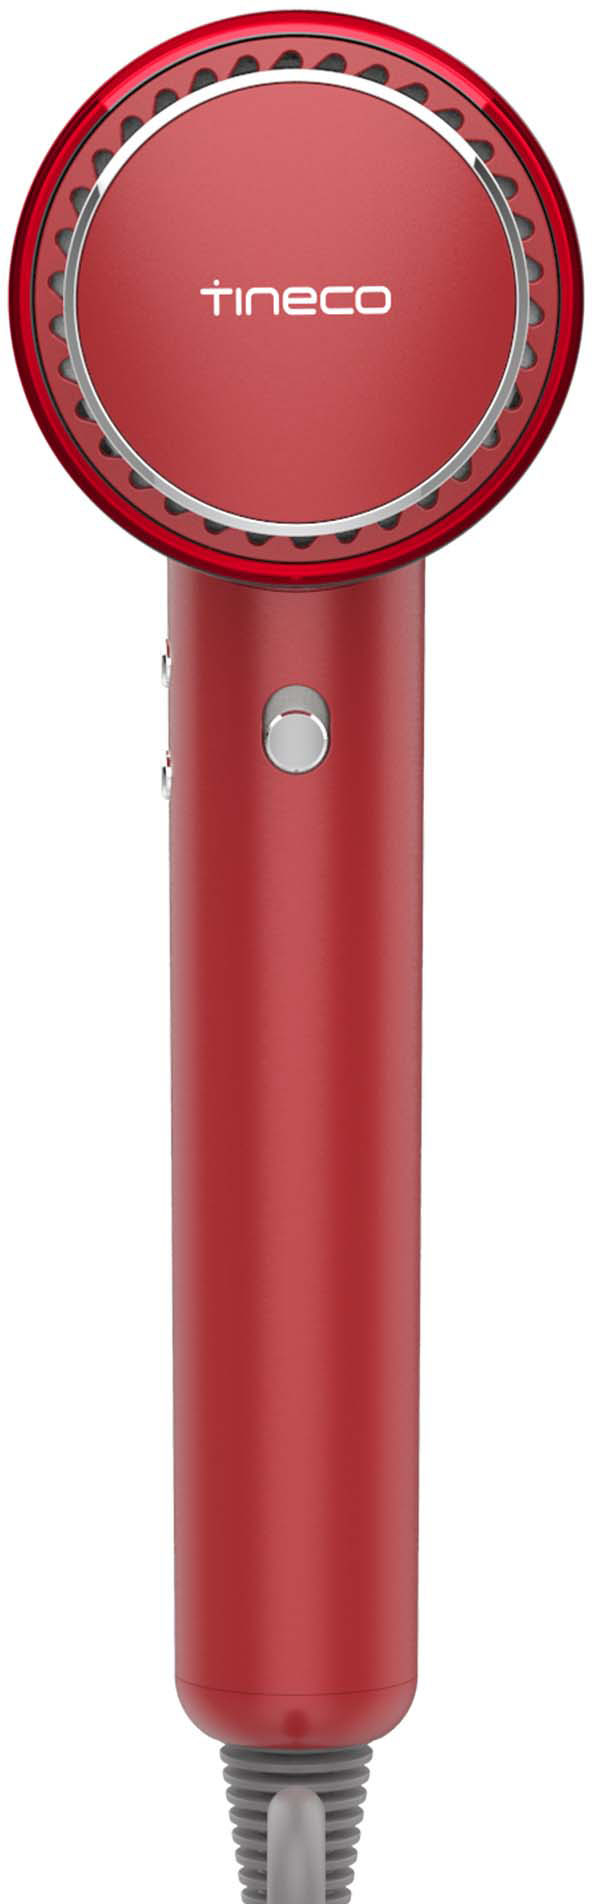 Angle View: Tineco - Smart Ionic Hair Dryer - Red